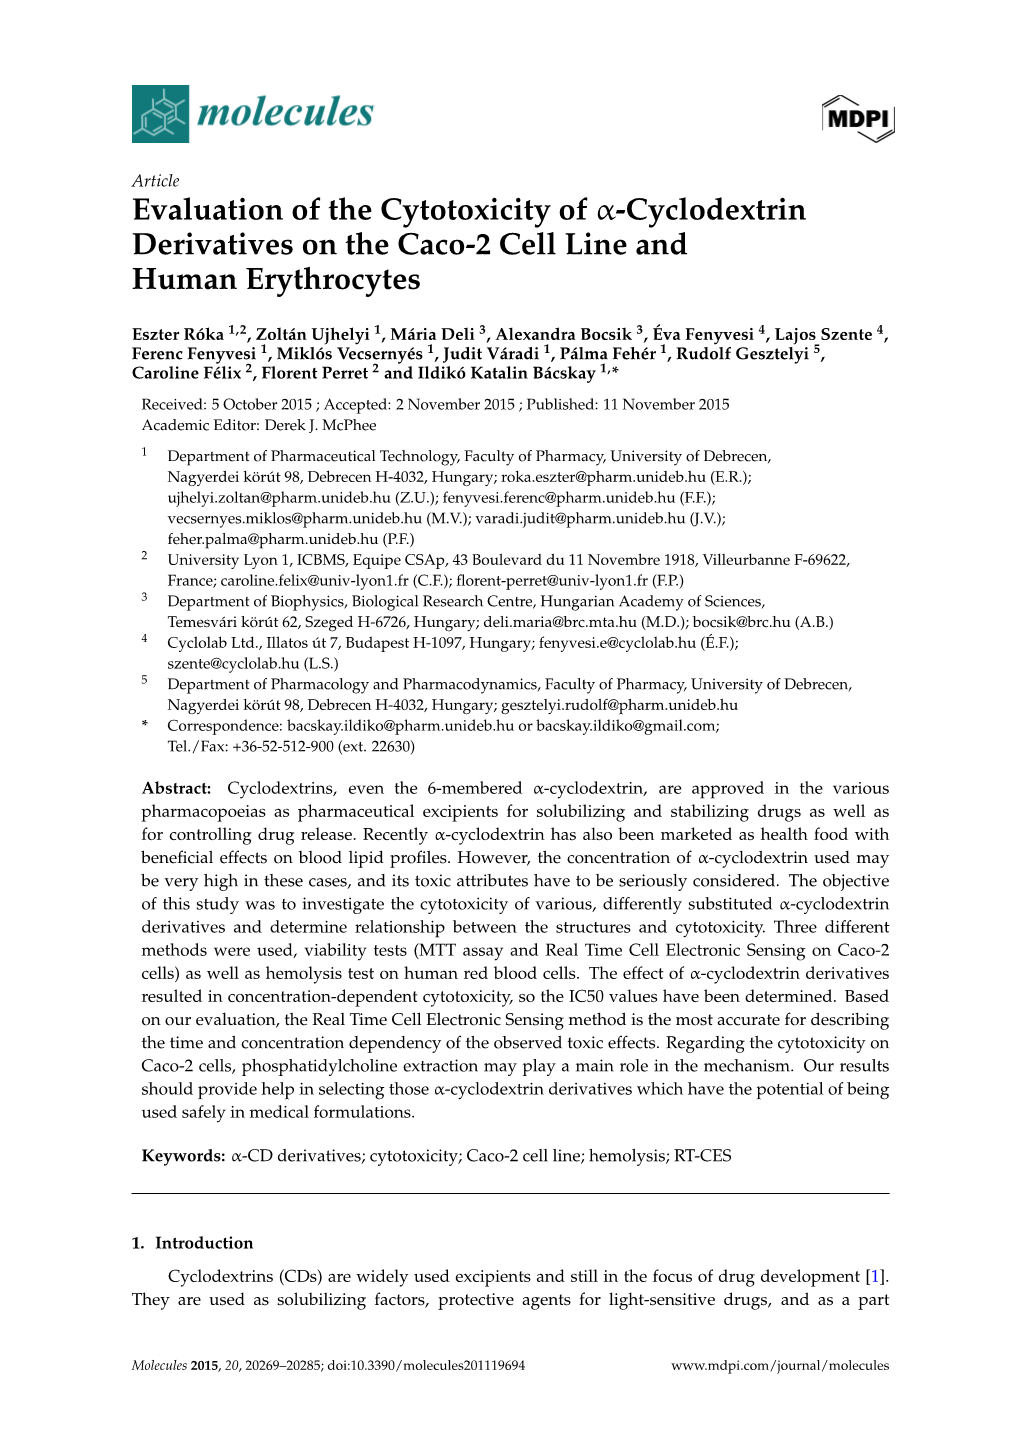 Evaluation of the Cytotoxicity of Α-Cyclodextrin Derivatives on the Caco-2 Cell Line and Human Erythrocytes